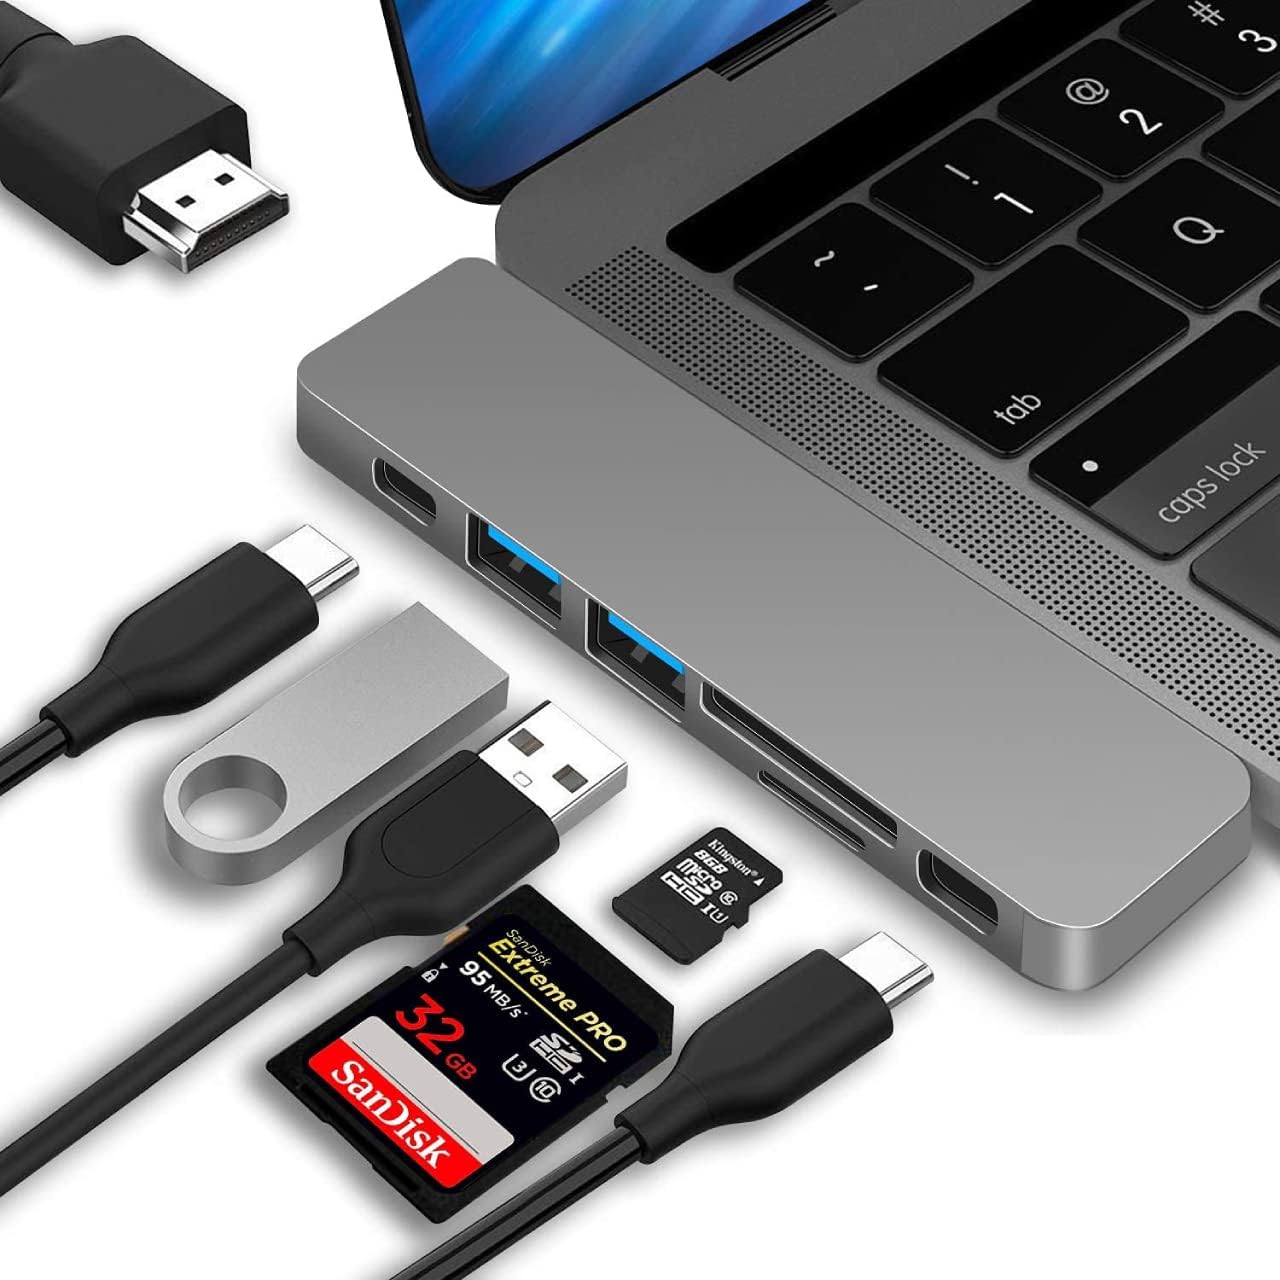 USB-C Multimedia Hub with Tethered USB-C Cable for Macbooks (Silver)